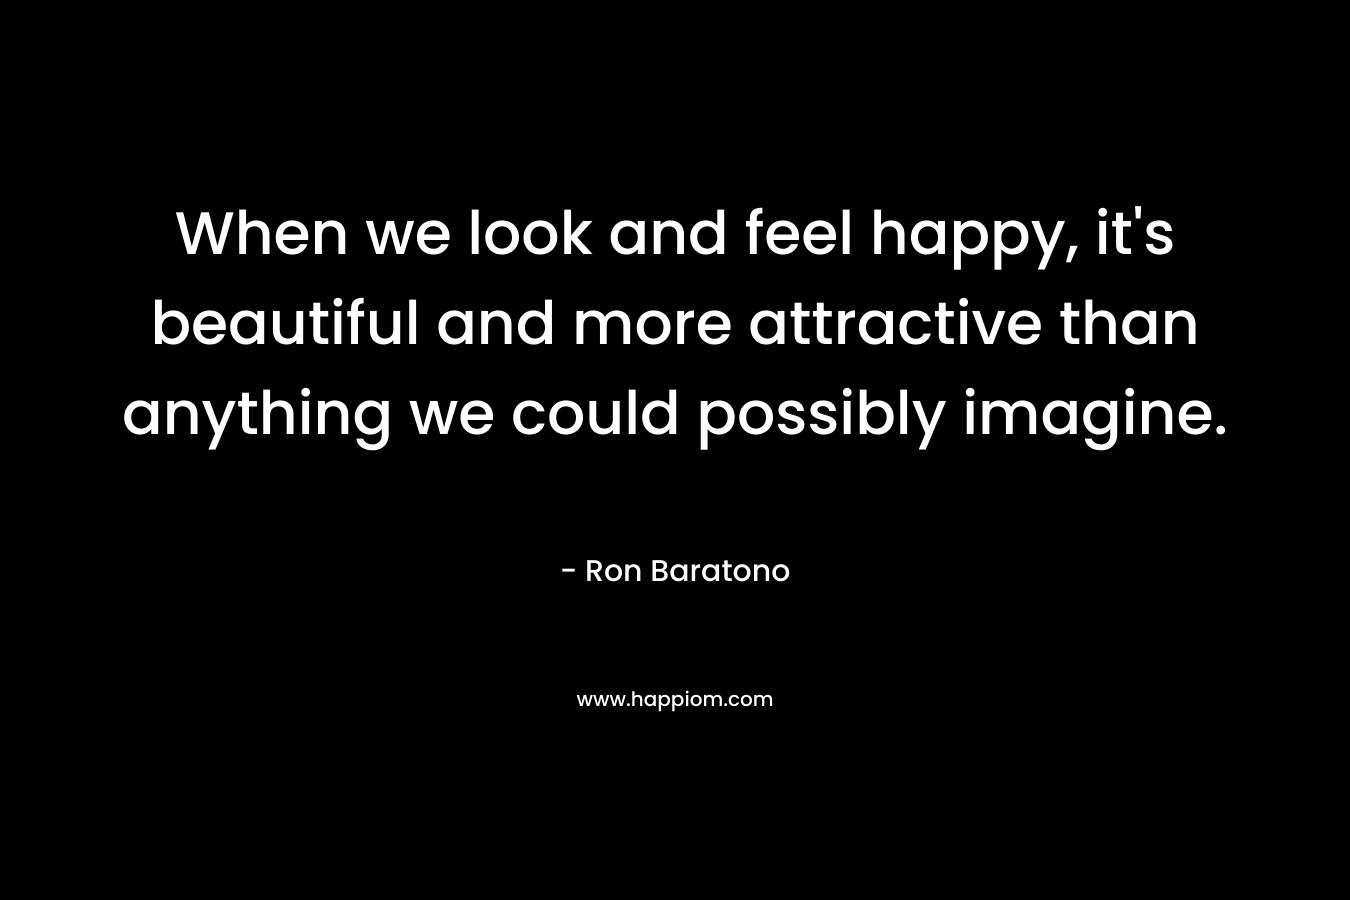 When we look and feel happy, it’s beautiful and more attractive than anything we could possibly imagine. – Ron Baratono